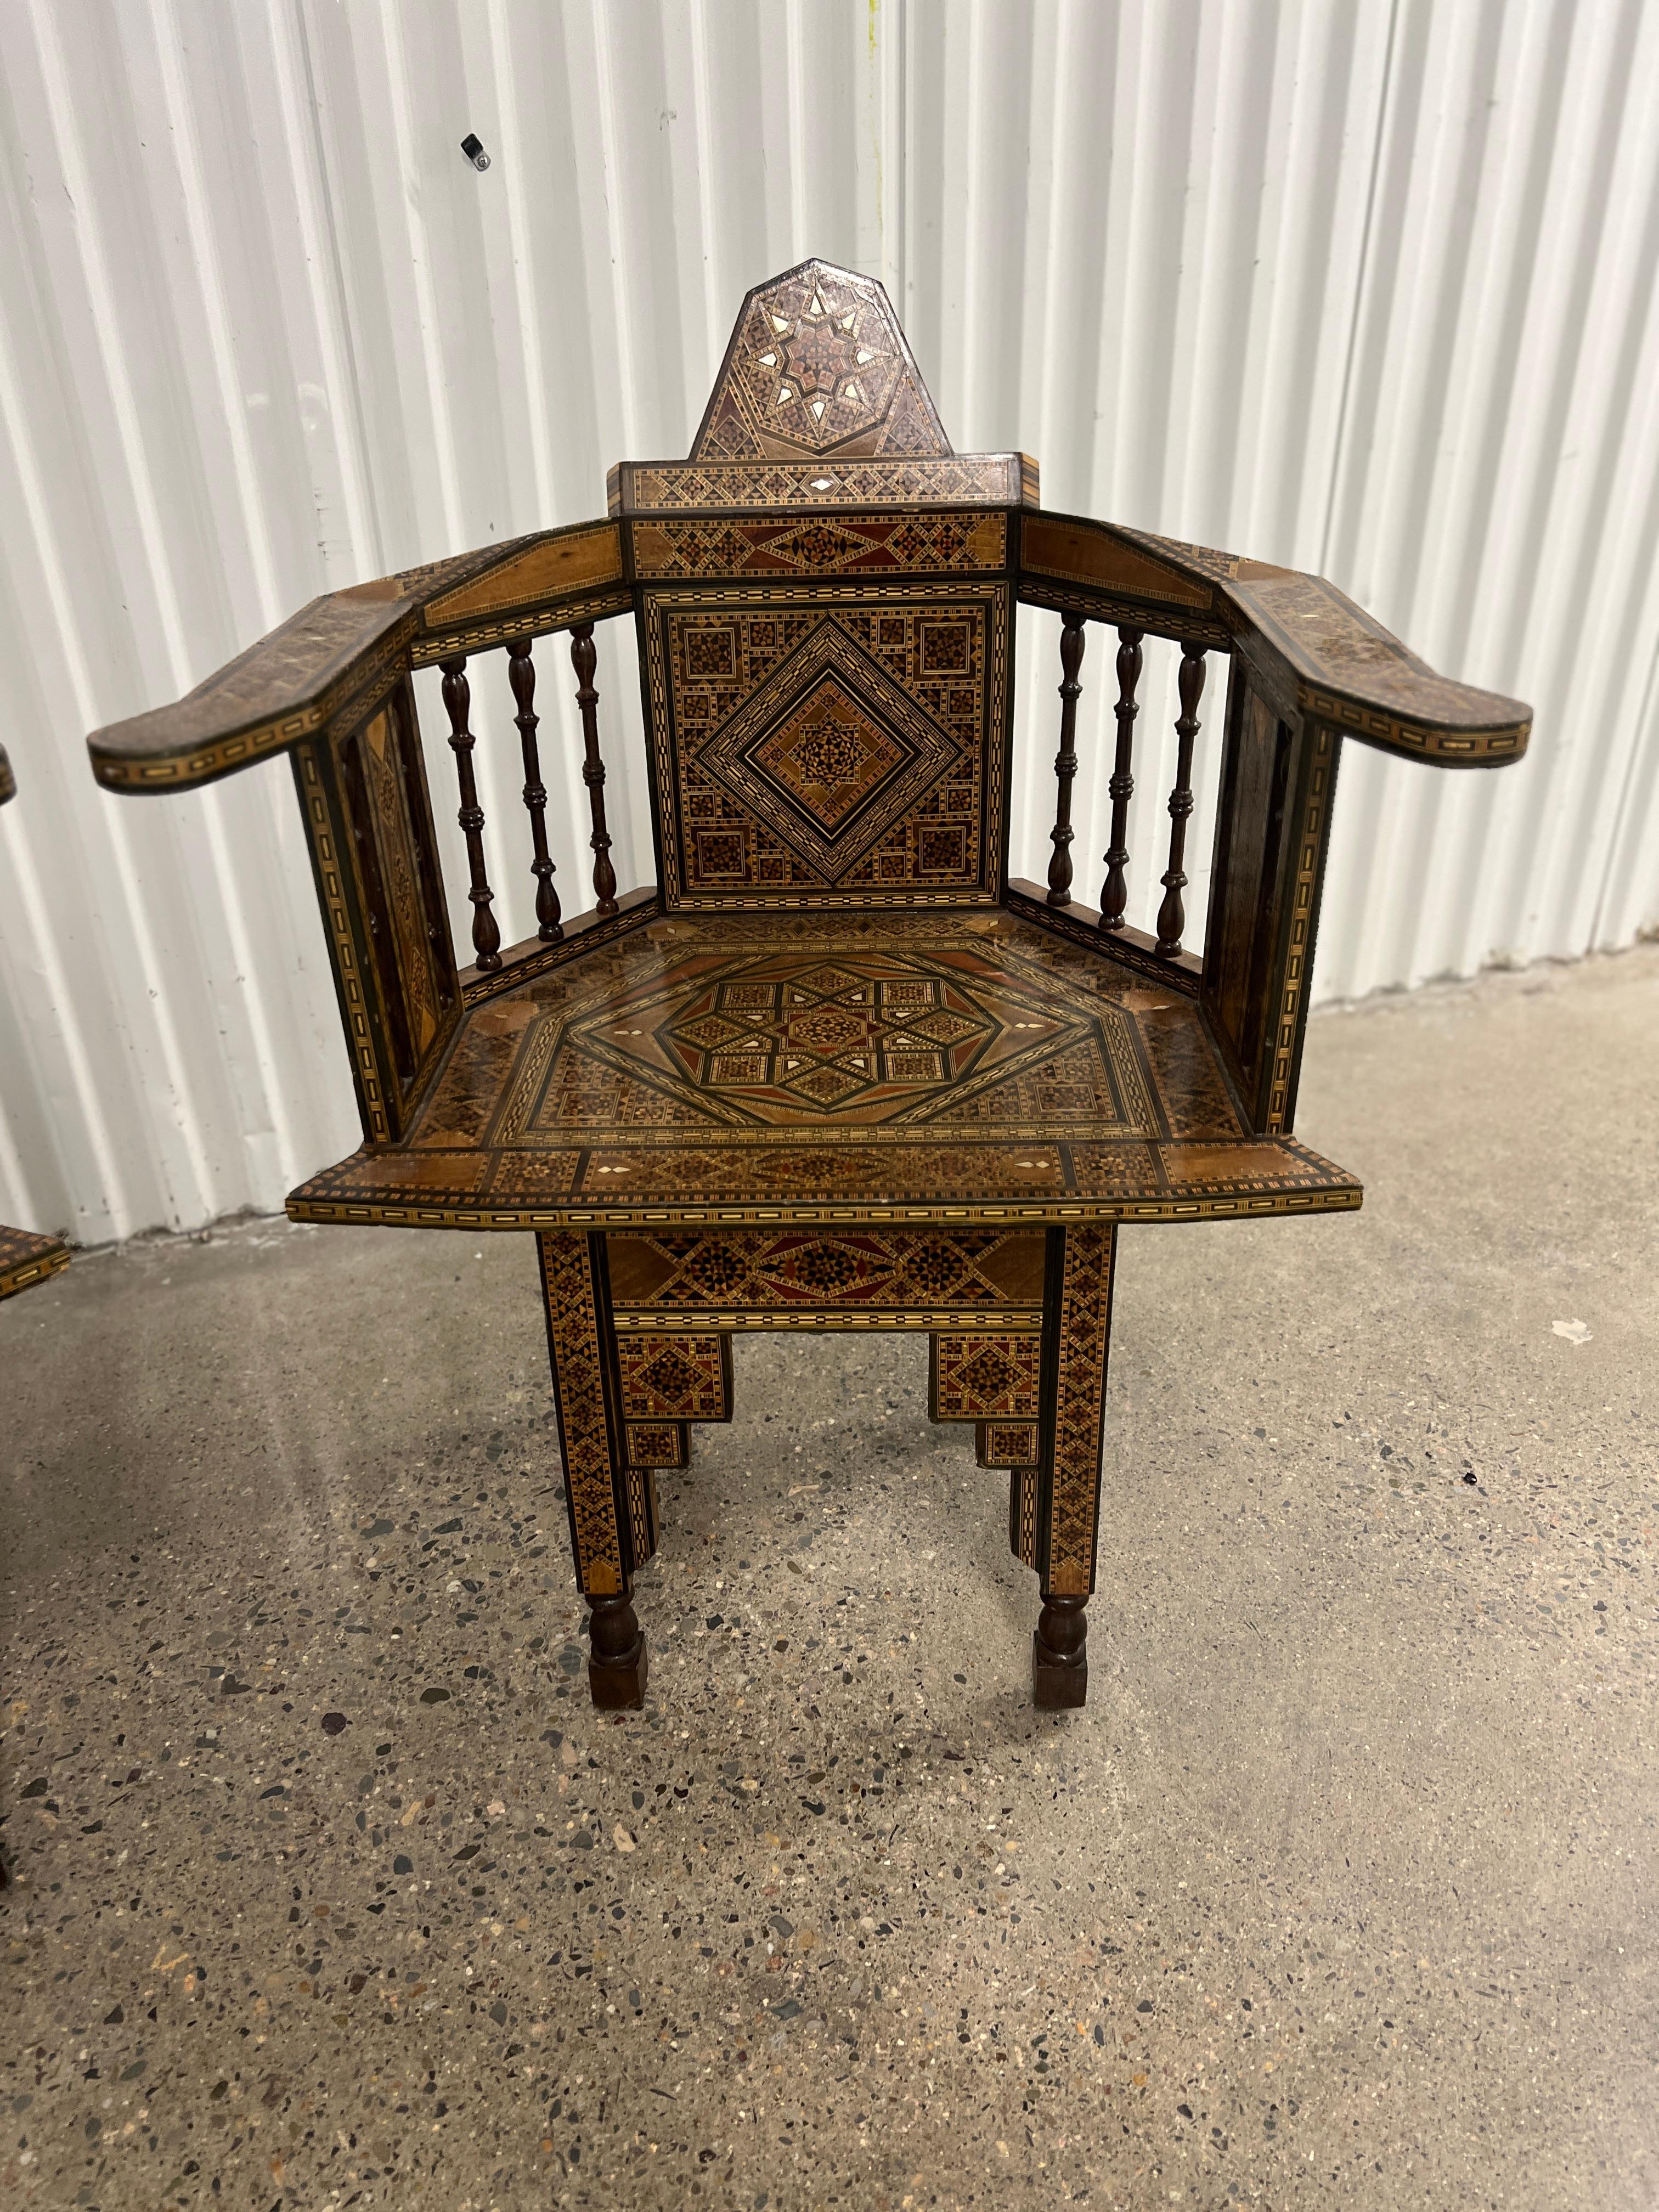 Syrian, early to mid 20th century.

A matched pair of unique and impressively inlaid Moorish armchairs. Each chair features immense inlay to every surface of the chair - from the mother of pearl, ebony and mixed exotic wood inlay to the crown,